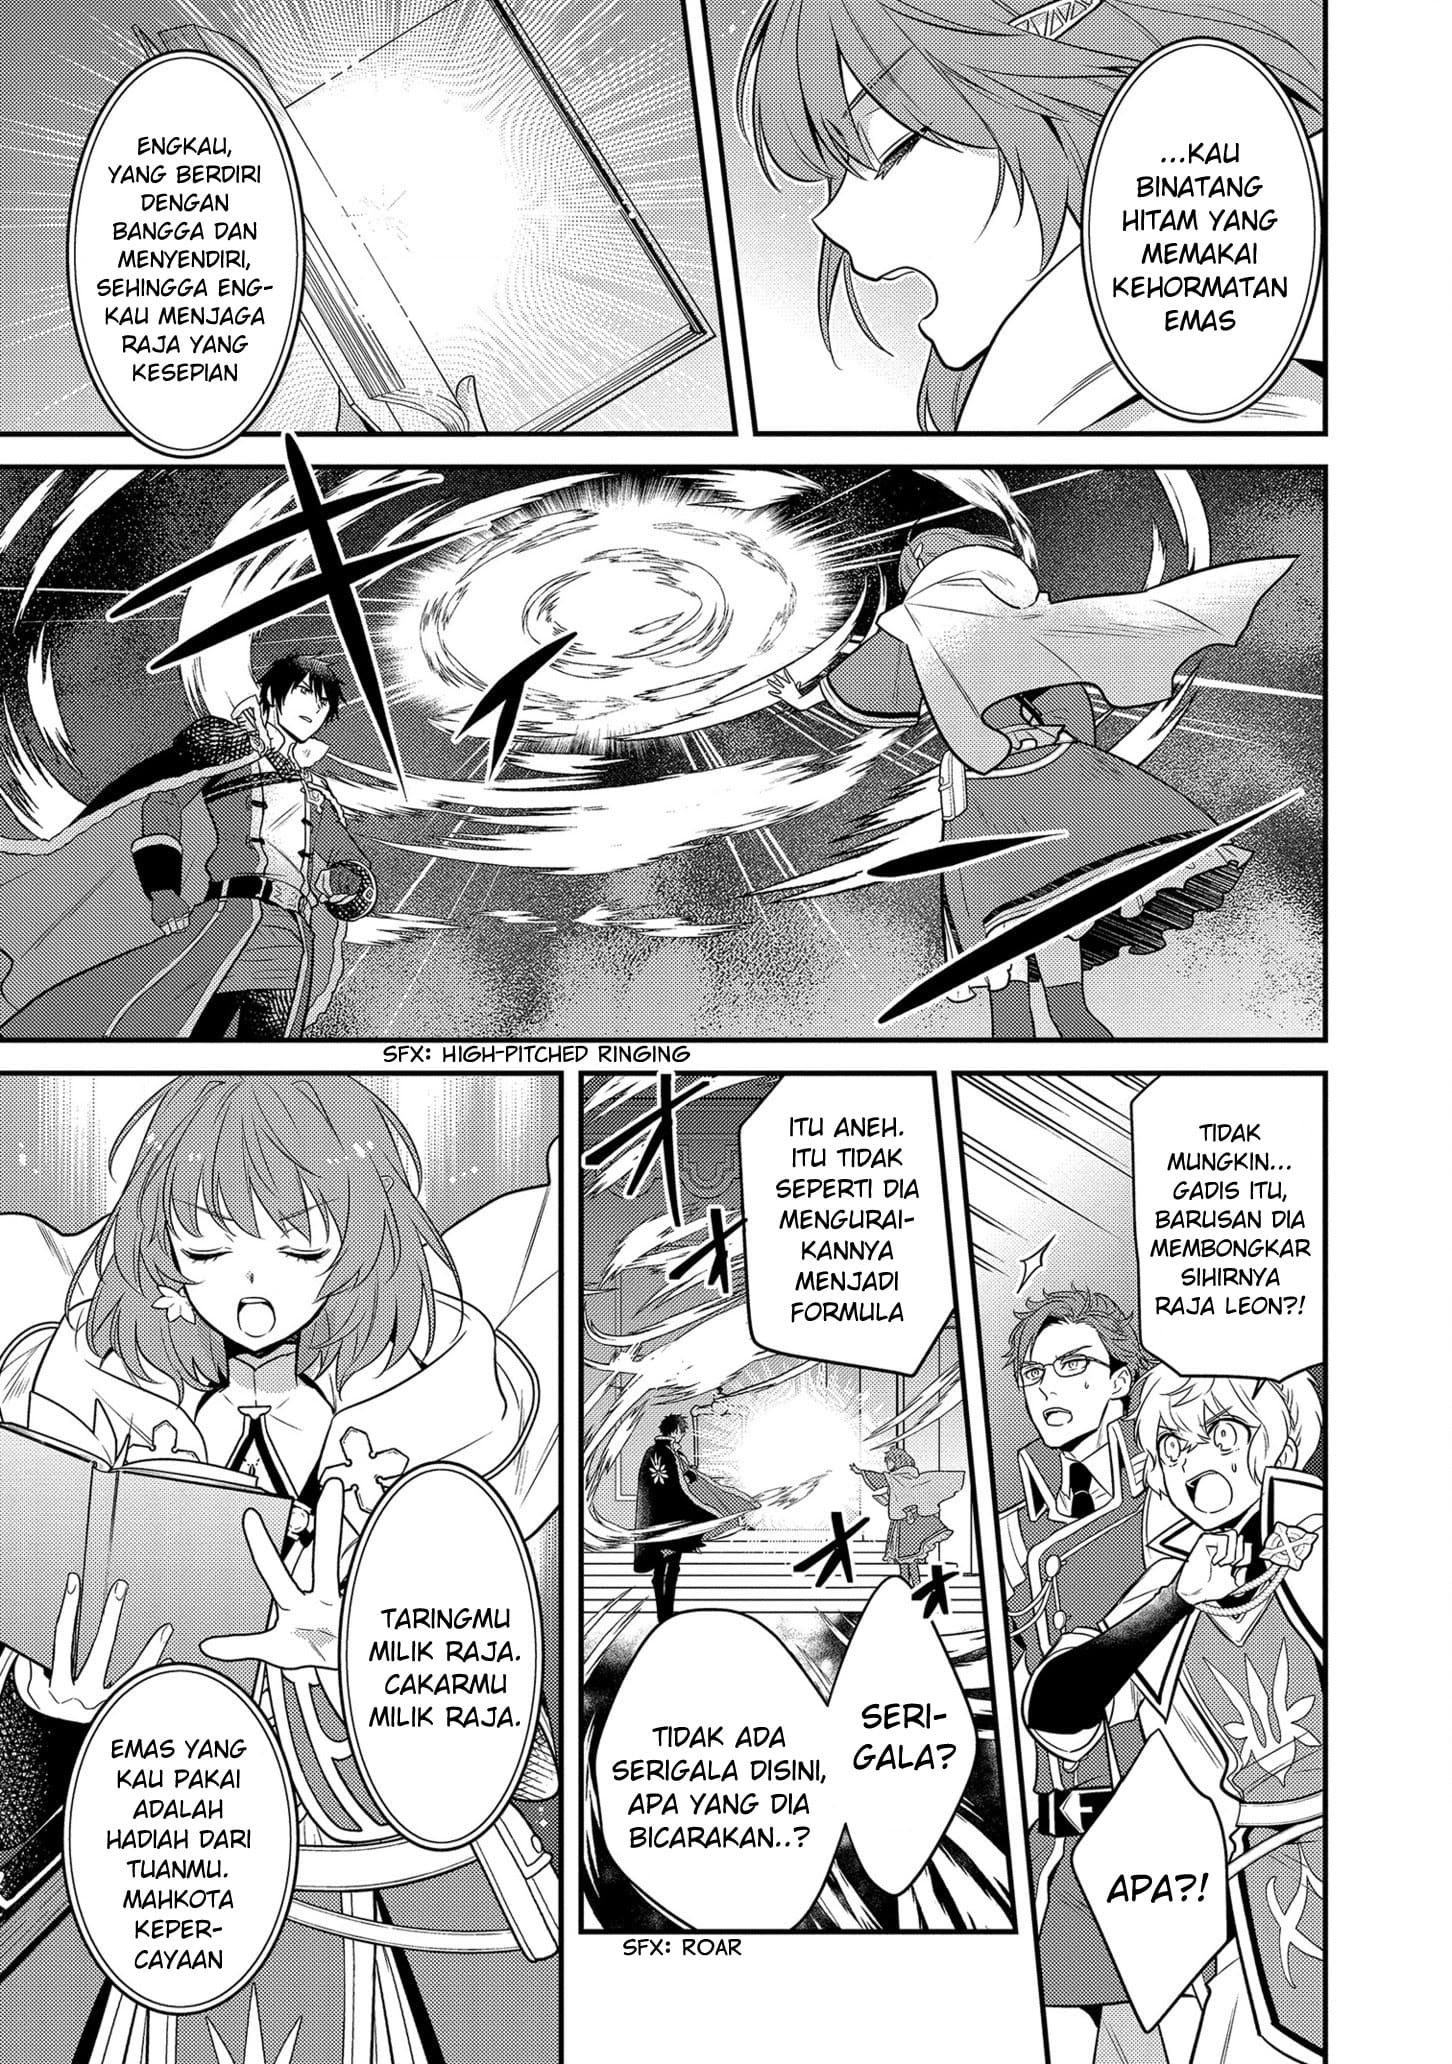 Baca The Tyrannical Holy King Wants to Dote on the Cheat Girl, but Right Now She’s Too Obsessed With Magic!!! Chapter 2.1  - GudangKomik